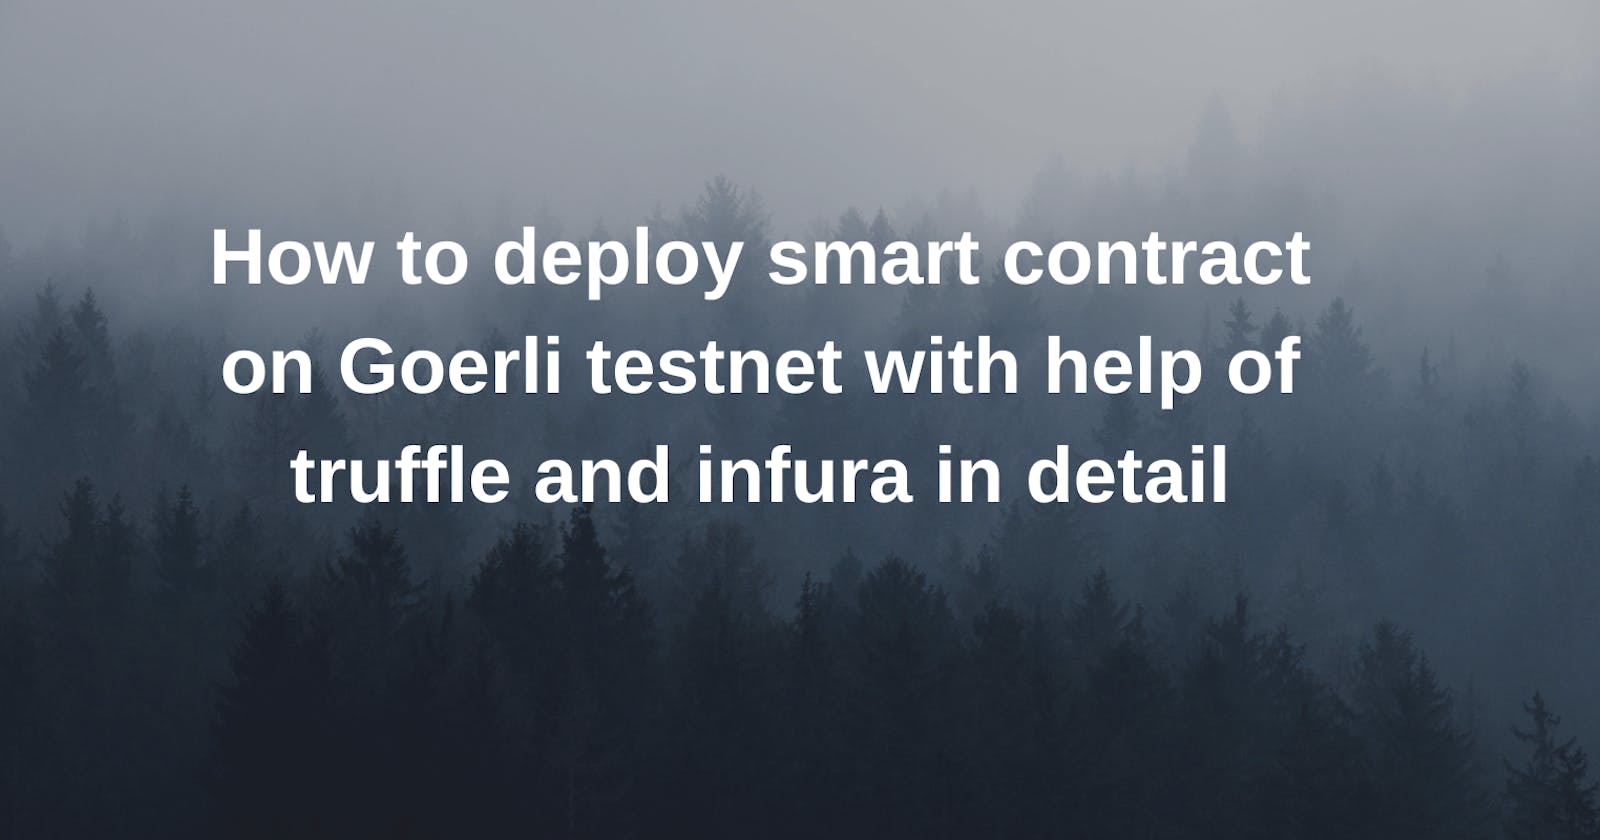 How to deploy smart contract on Goerli testnet with help of truffle and infura in detail